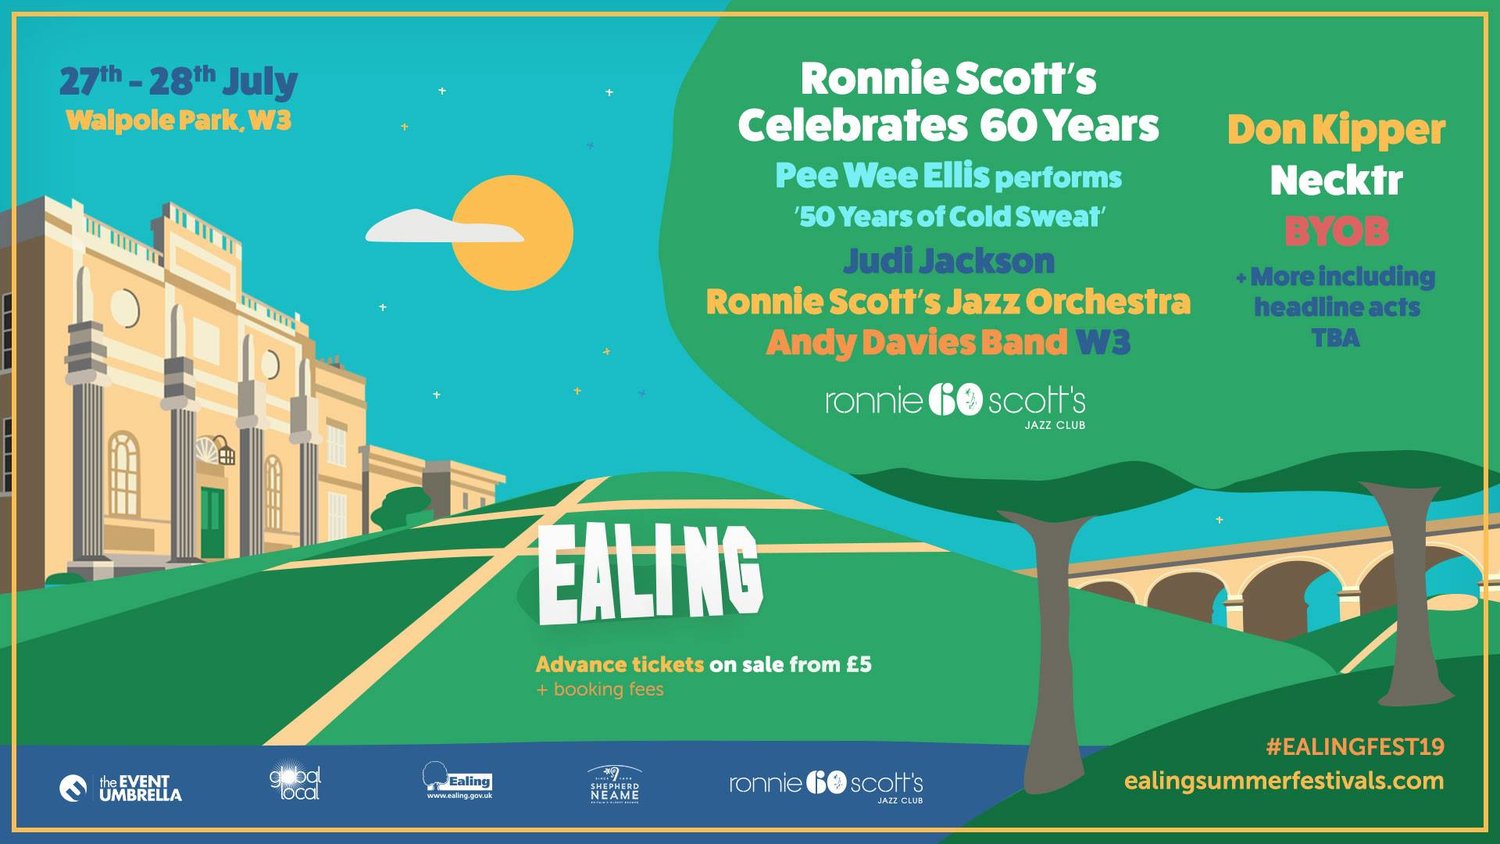 The Ealing Jazz Festival will come to Ealing's stunning Walpole Park.